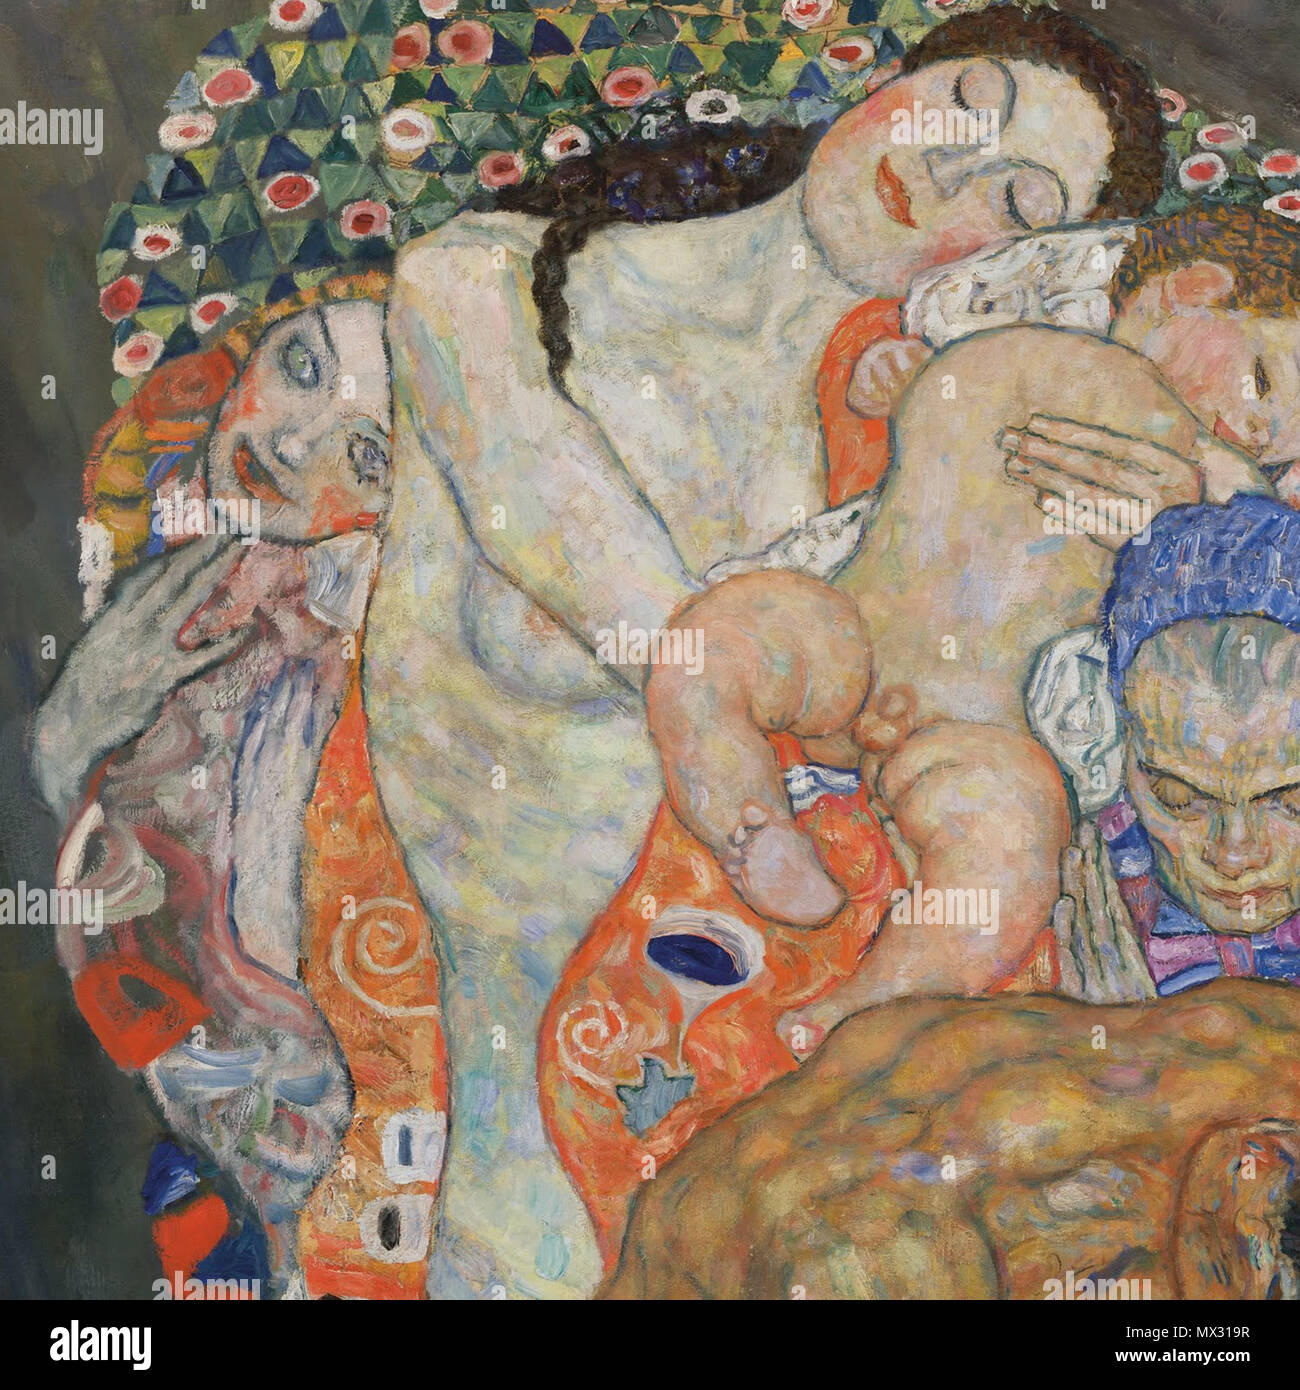 English: Detail of Death and Life by Gustav Klimt, cropped from the Google  Art Project photo hosted on Commons . 1905/1910 259 Gustav Klimt - Death  and Life - detail Google Art Project Stock Photo - Alamy